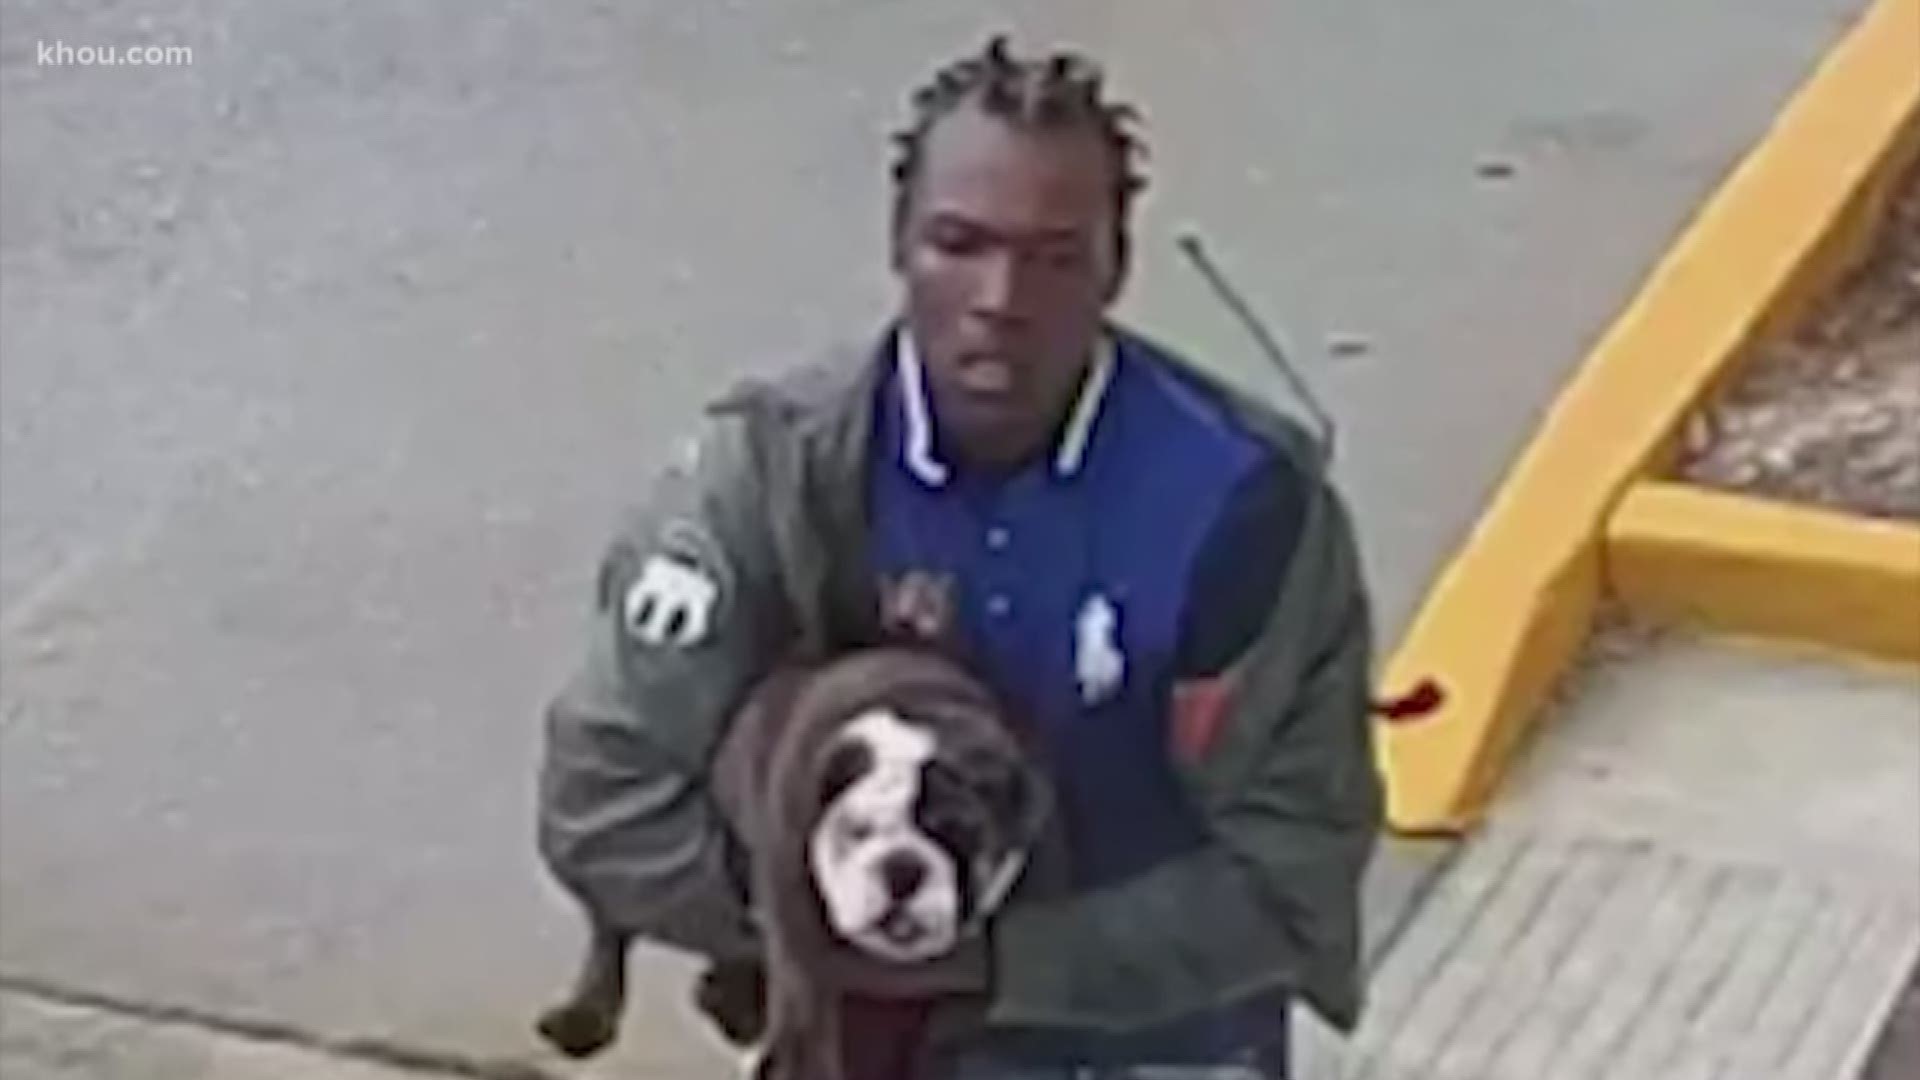 Do you recognize this man? Police said he met up with a breeder, and after inspecting the dog, he ran off with it.